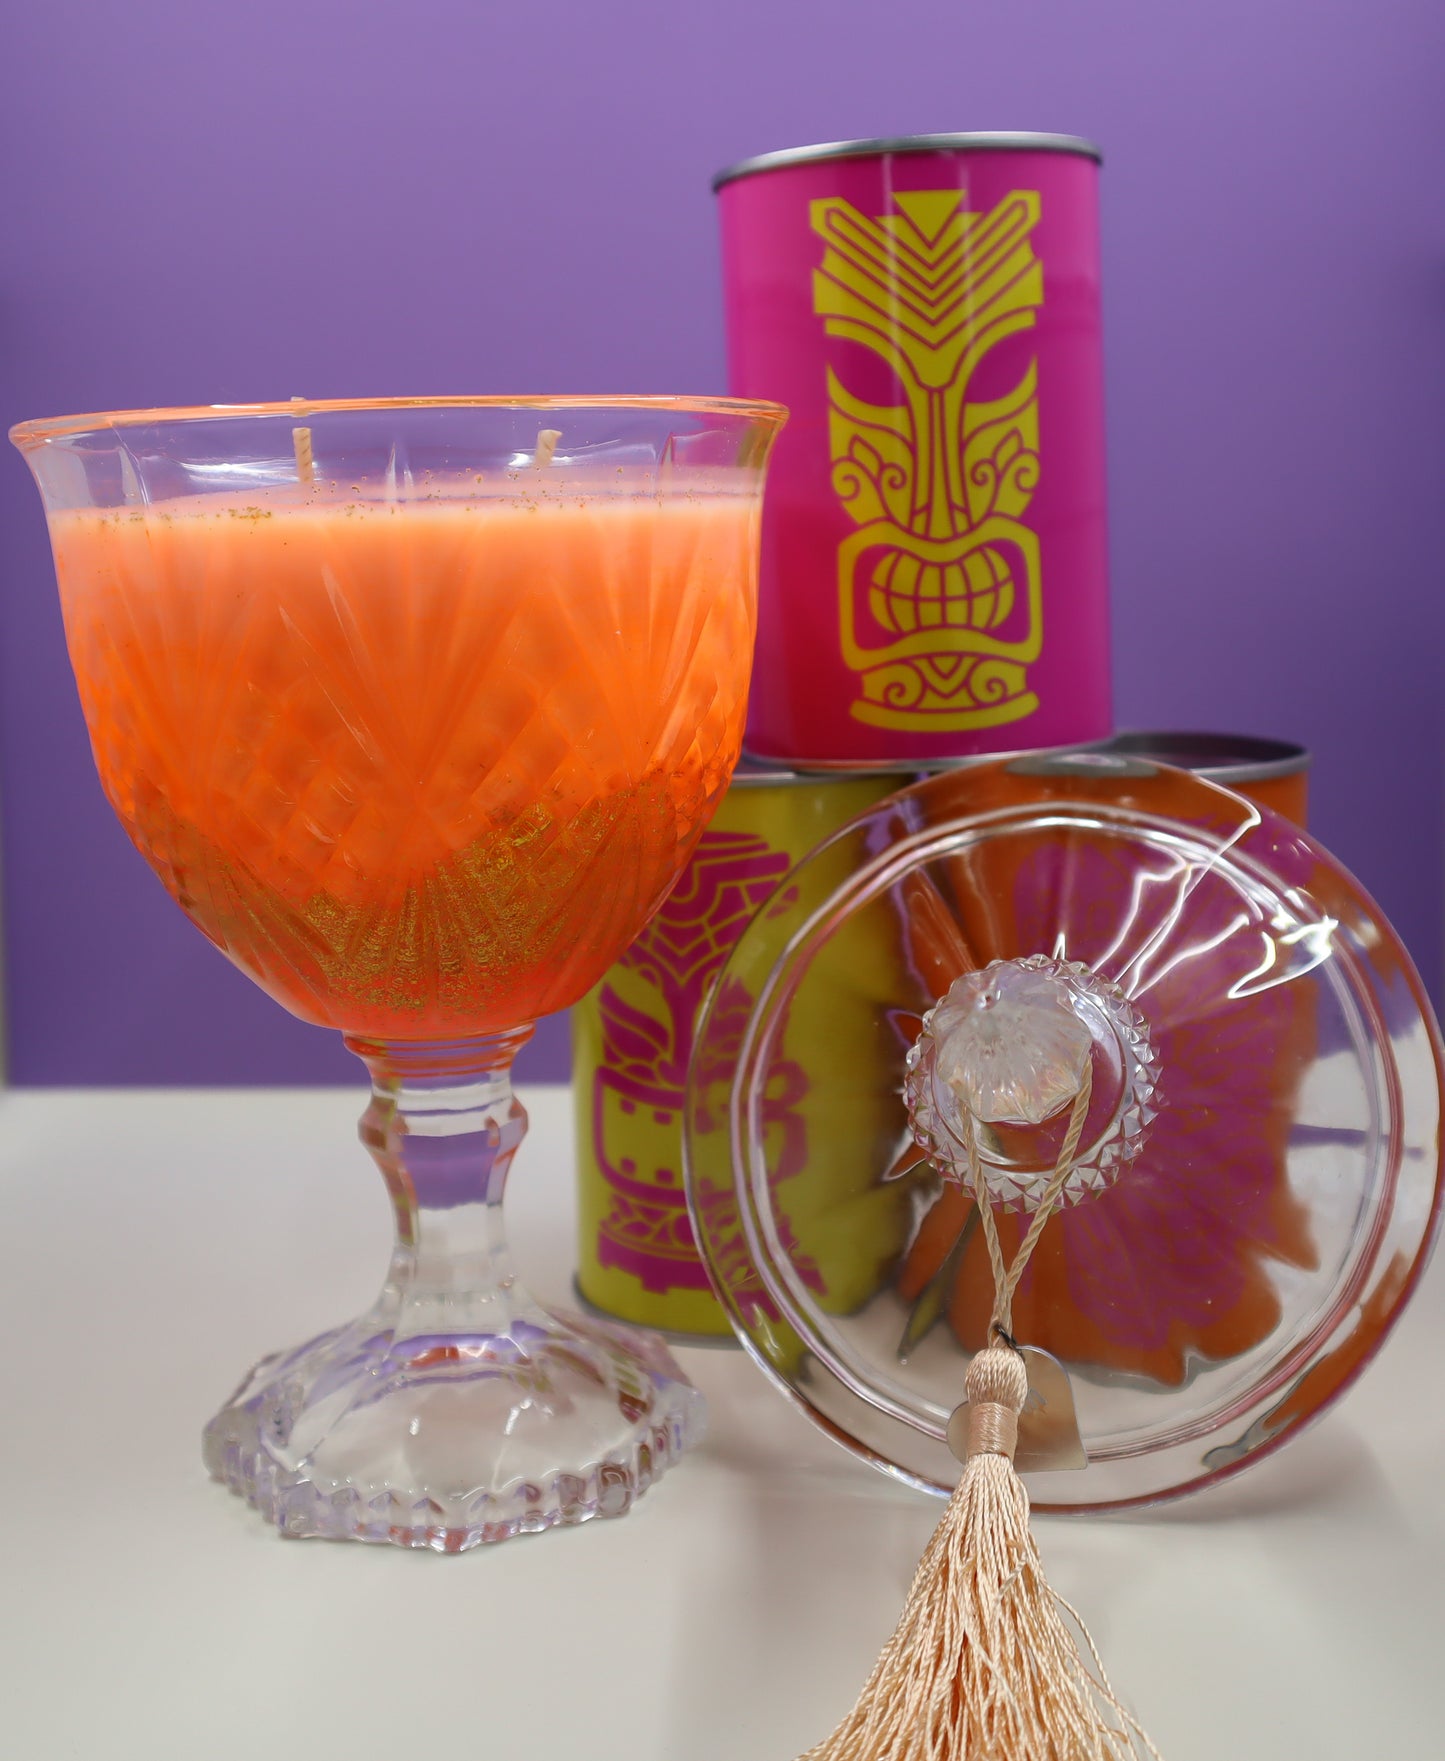 Juicy Orange candle - Regal Clear Glass Goblet